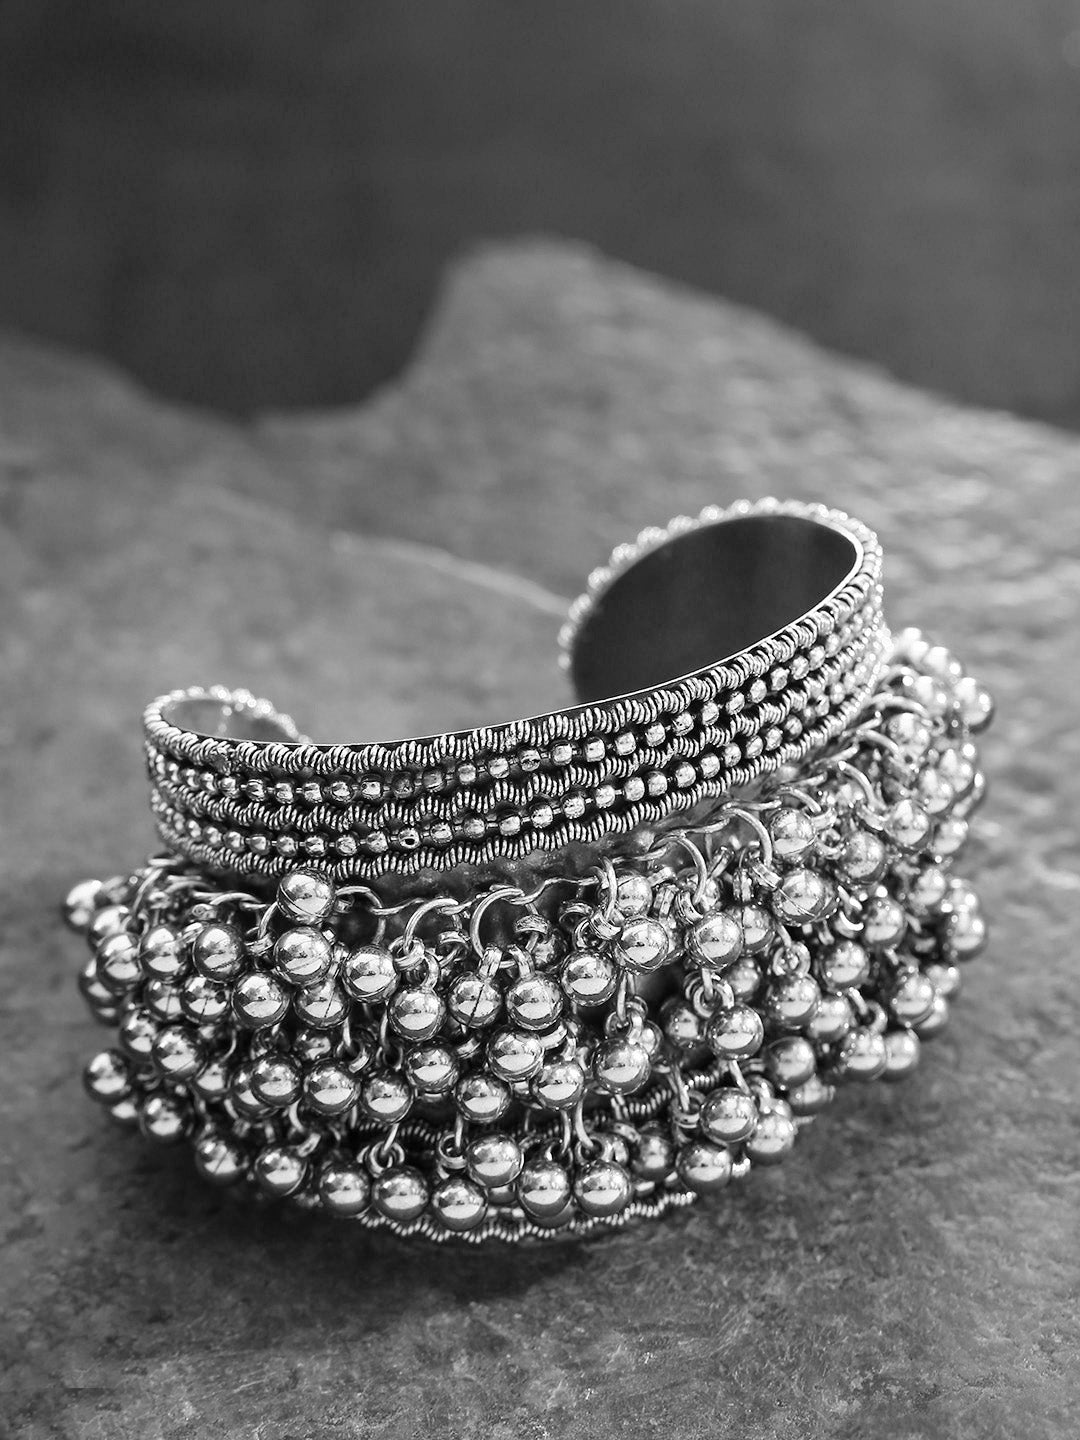 Oxidised Silver-Toned Ghungroo Handcrafted Cuff Bracelet